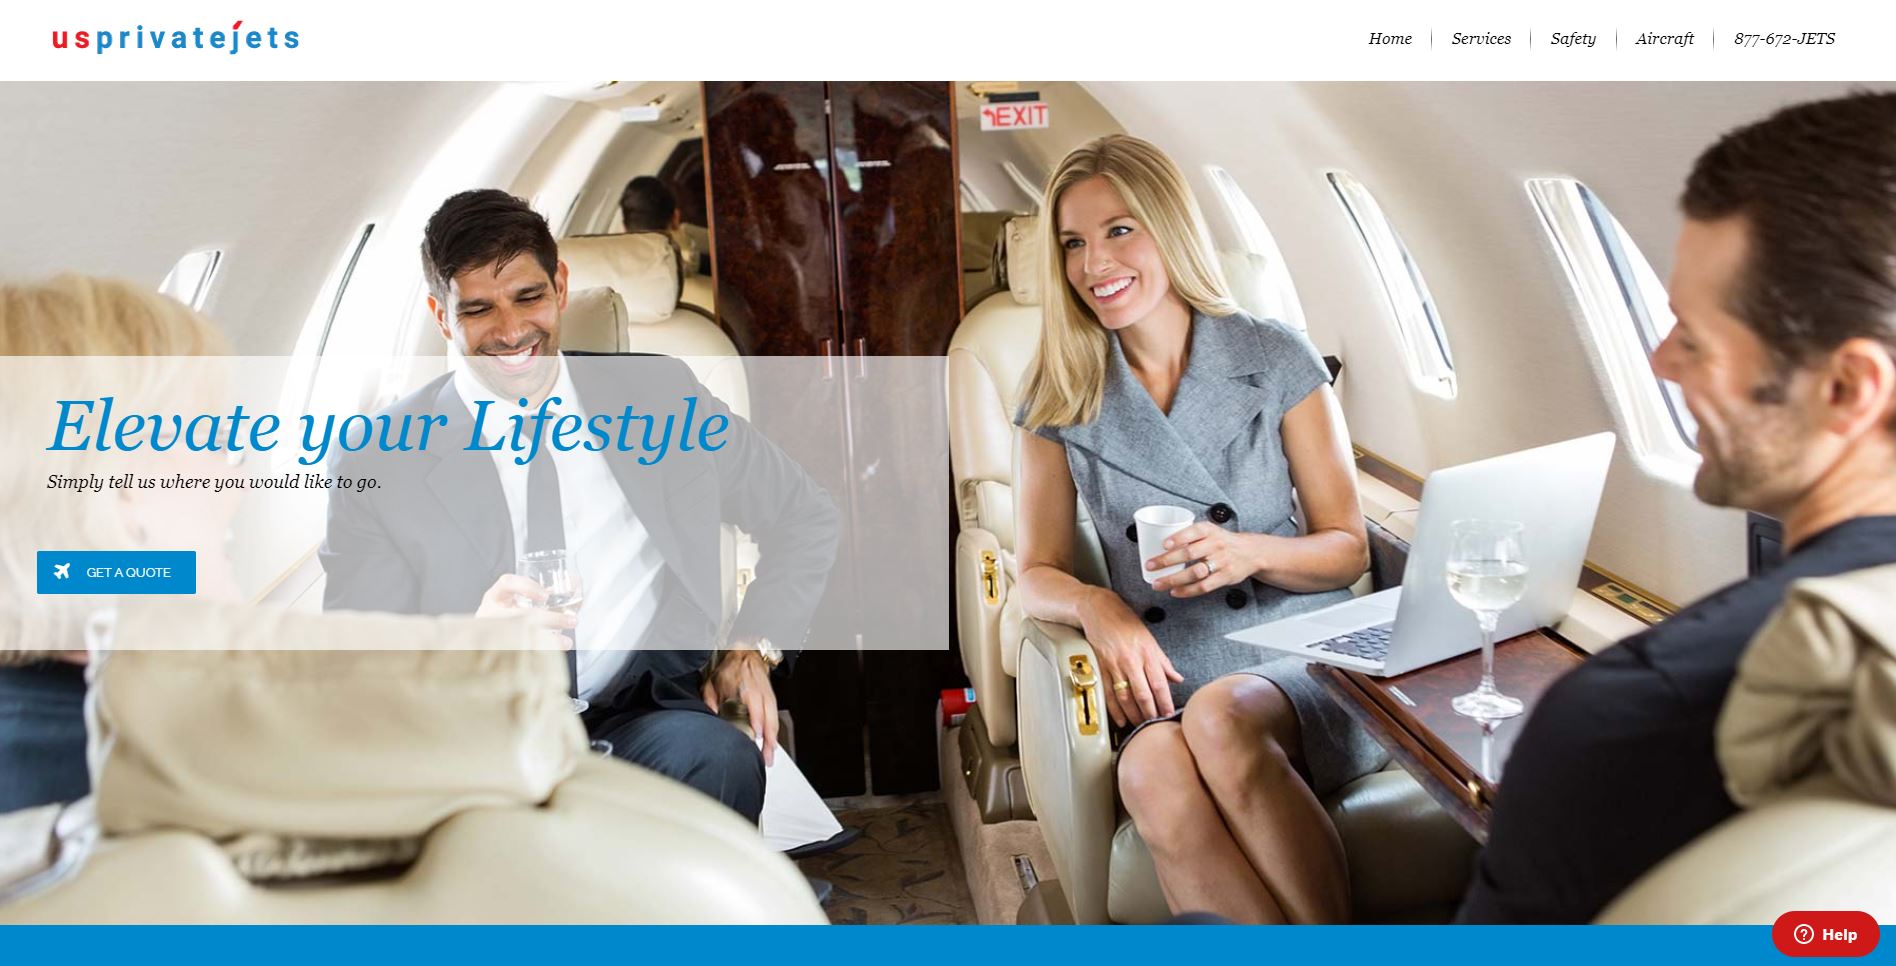 US Private Jets Homepage - Air Charter